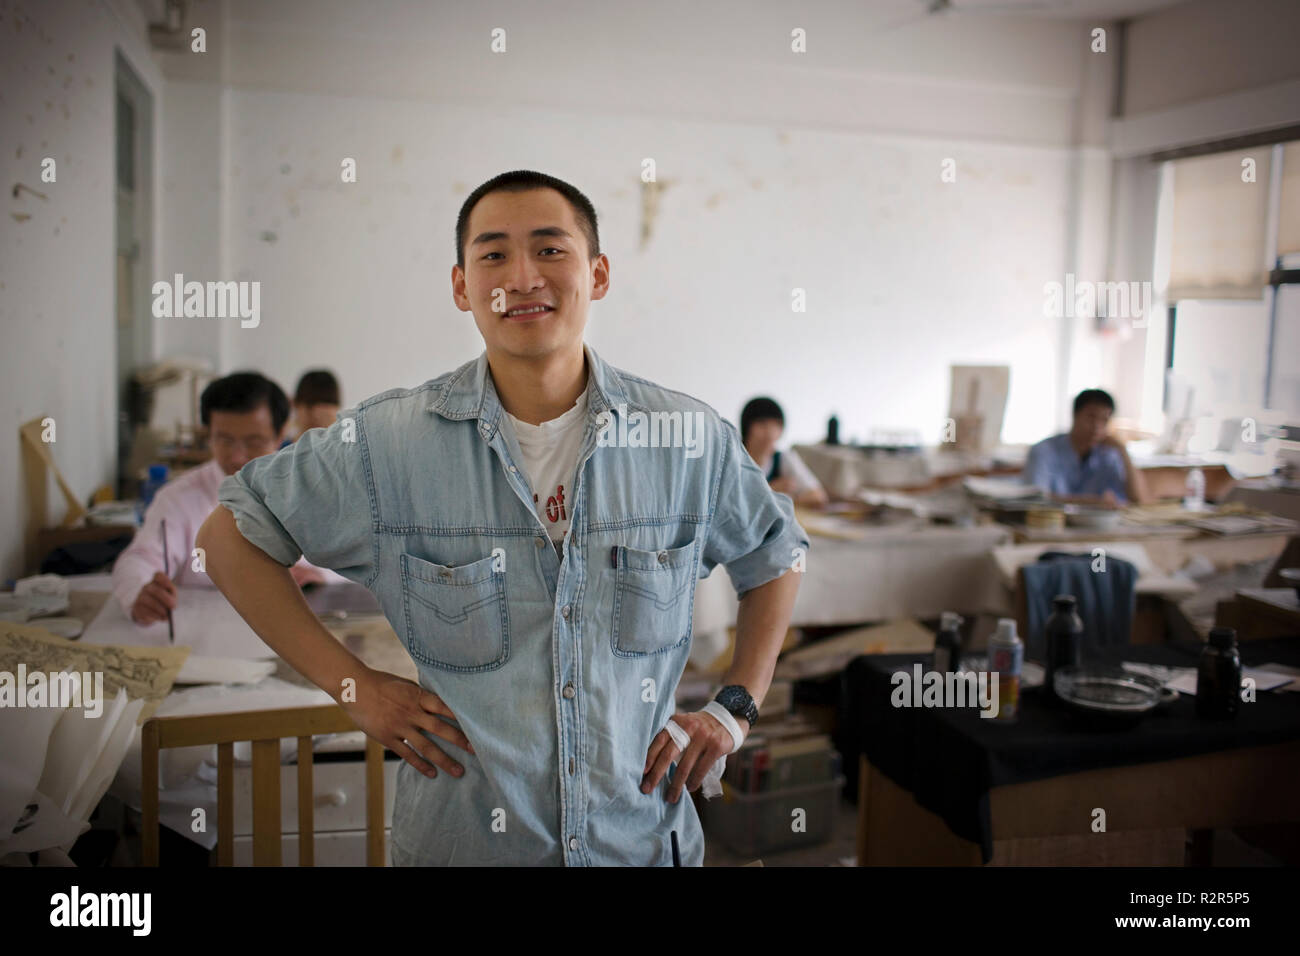 Portrait of a young adult man standing in an art classroom. Stock Photo